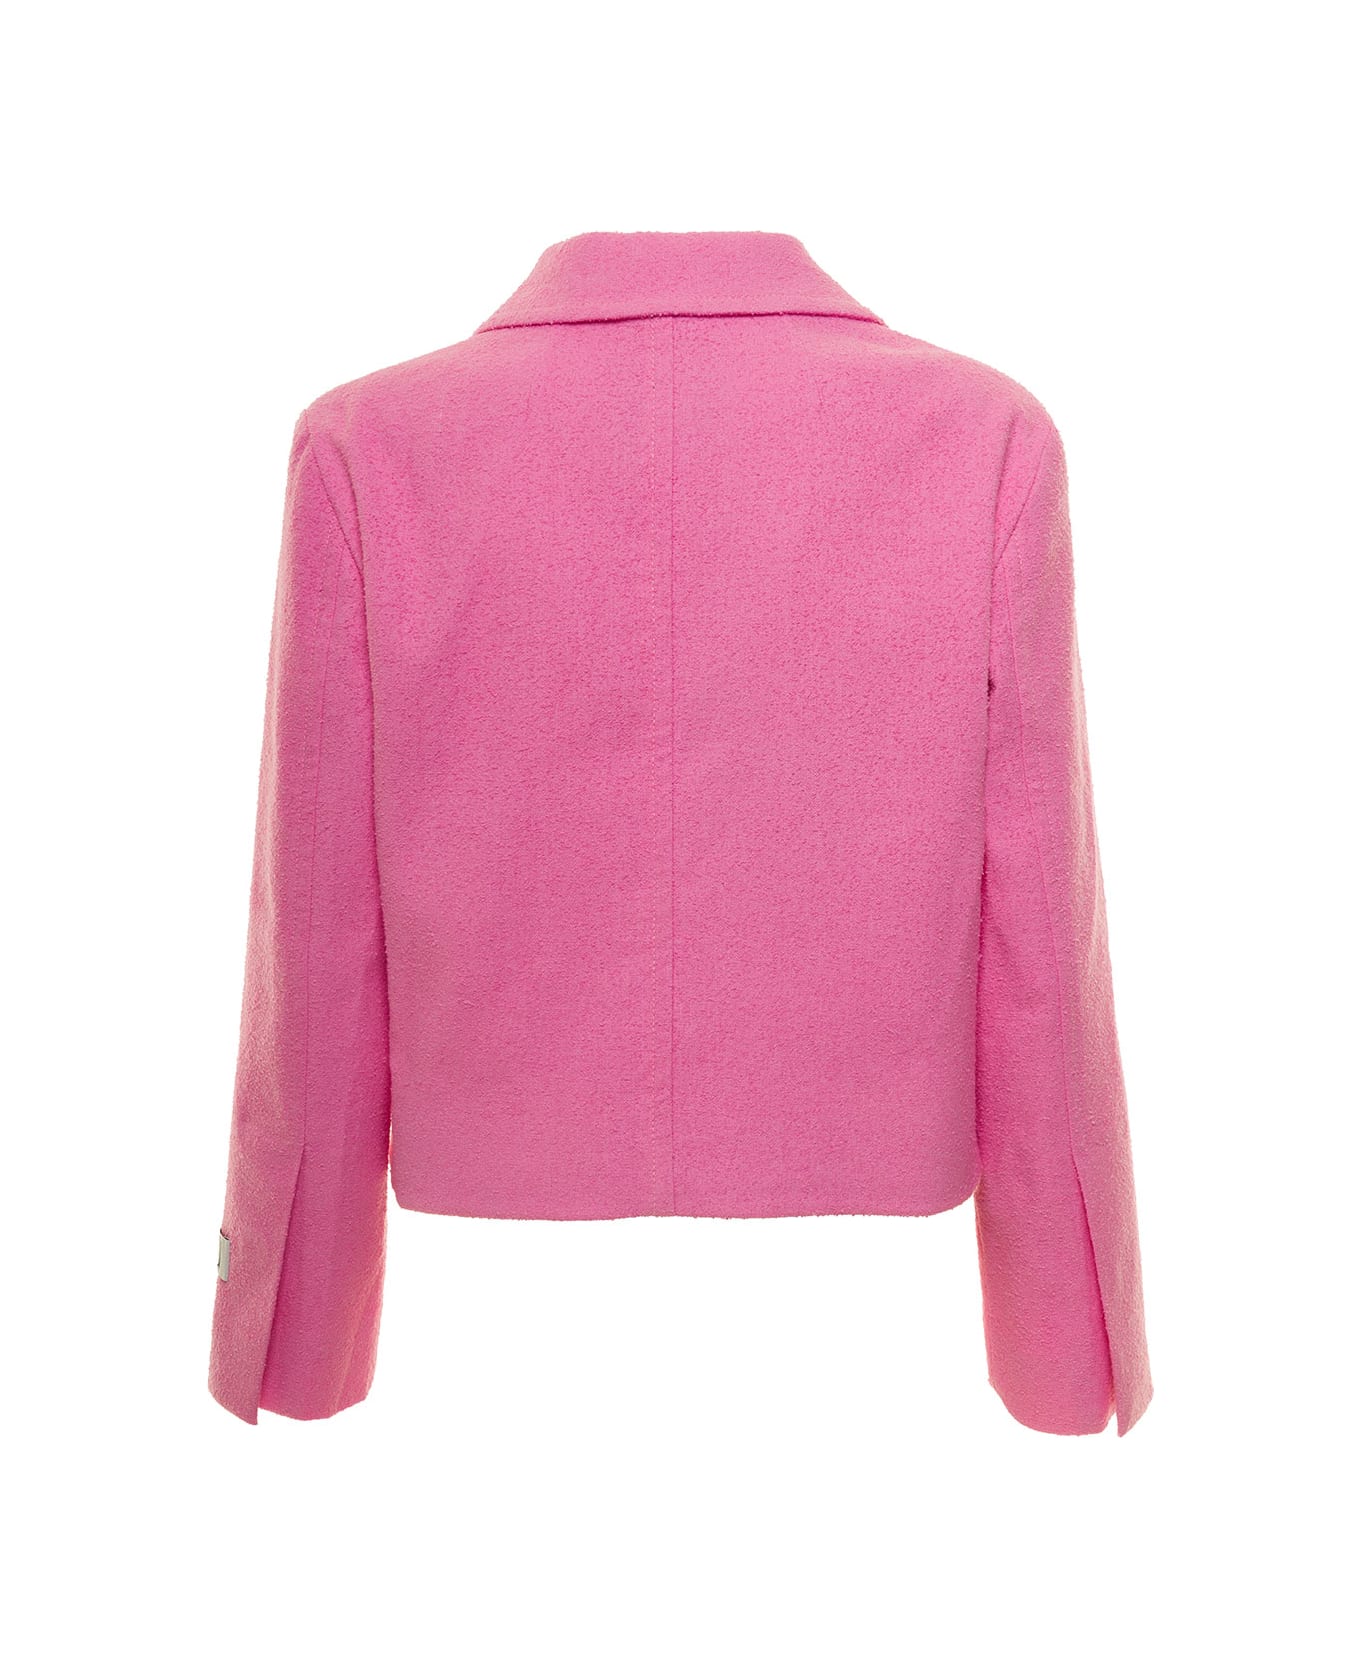 Patou Pink Jacket With Branded Buttons In Cotton Blend Tweed Woman - 453B